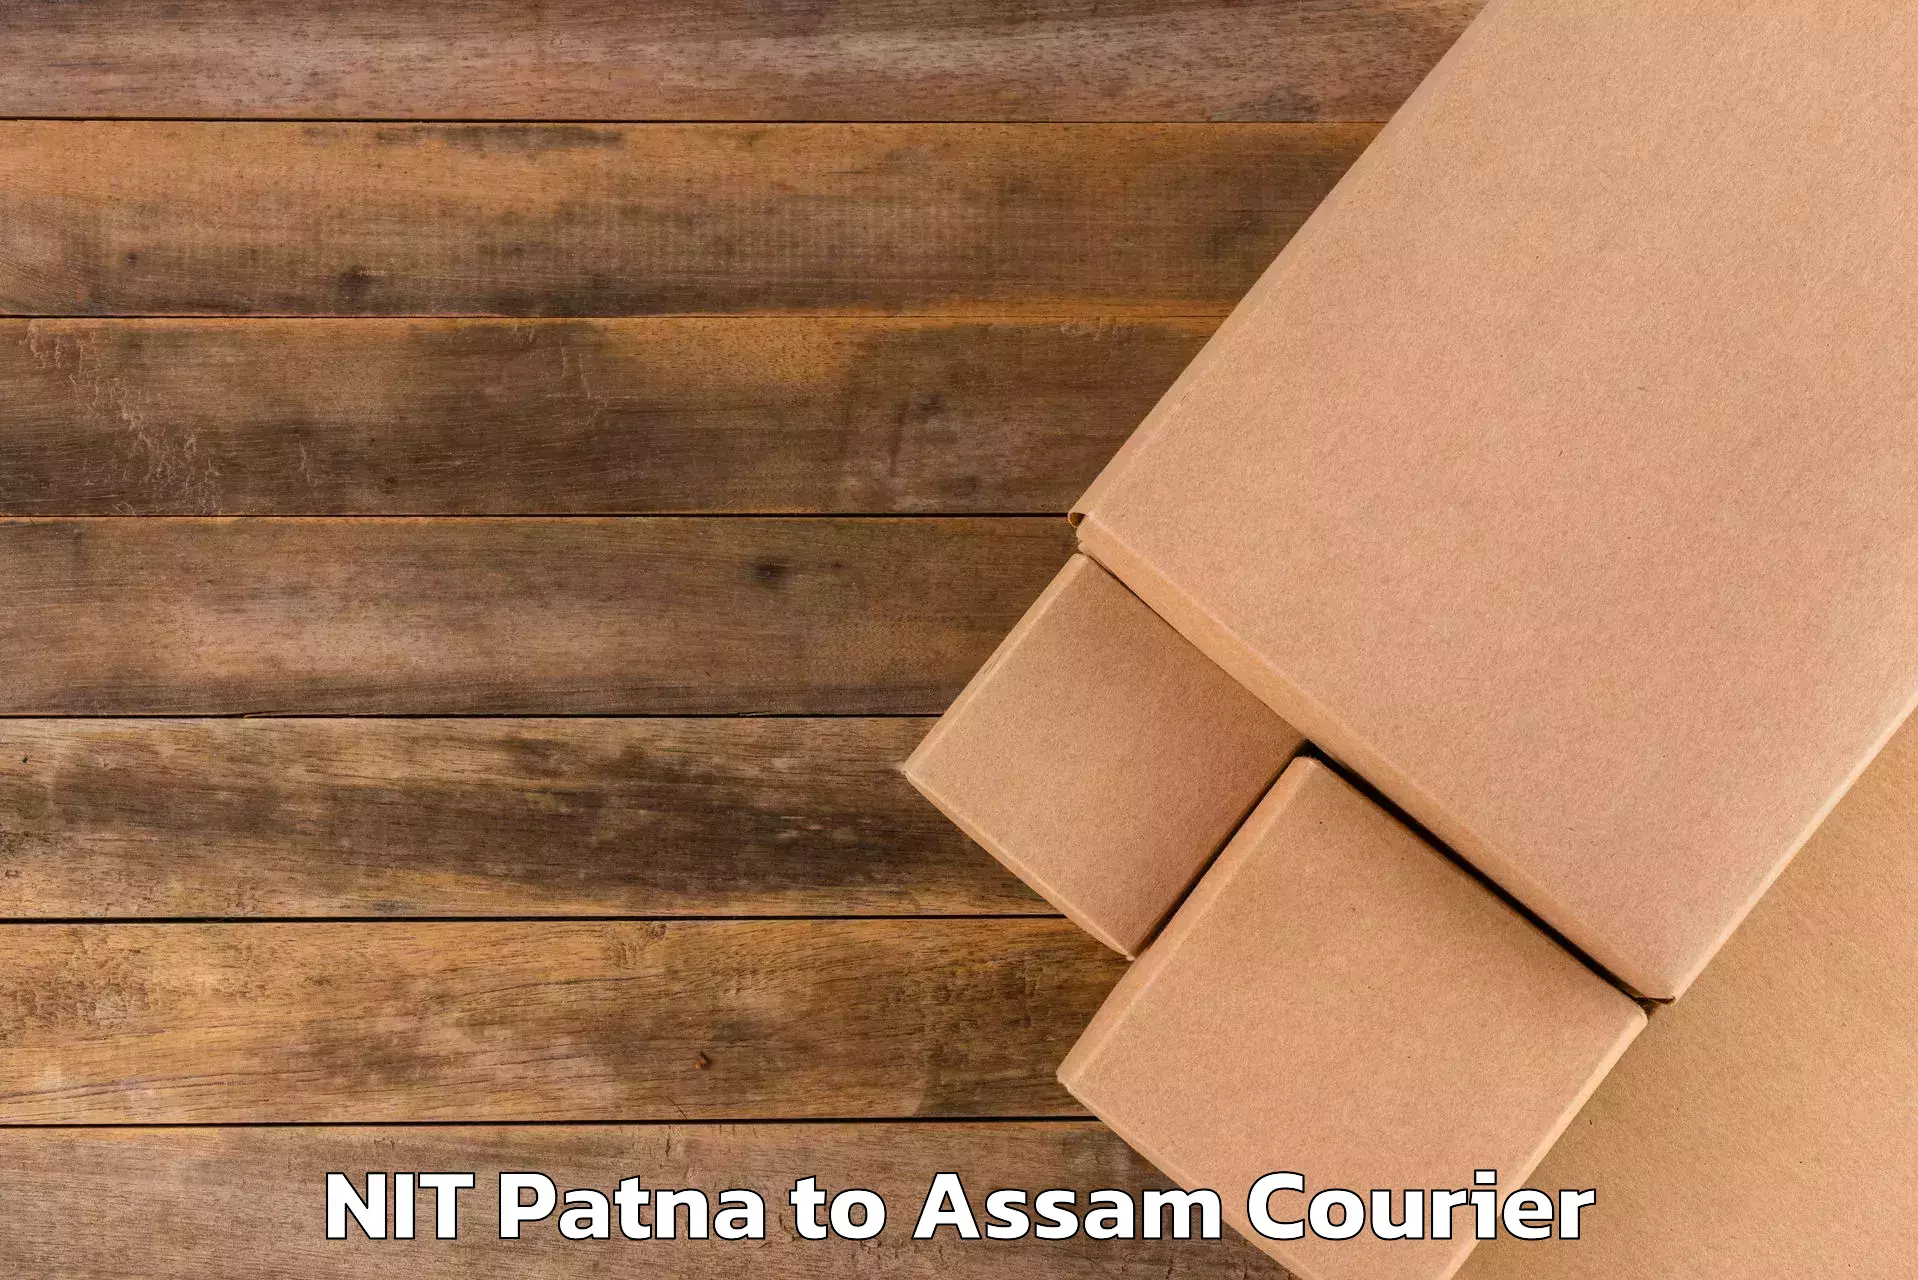 Personal effects shipping NIT Patna to Assam